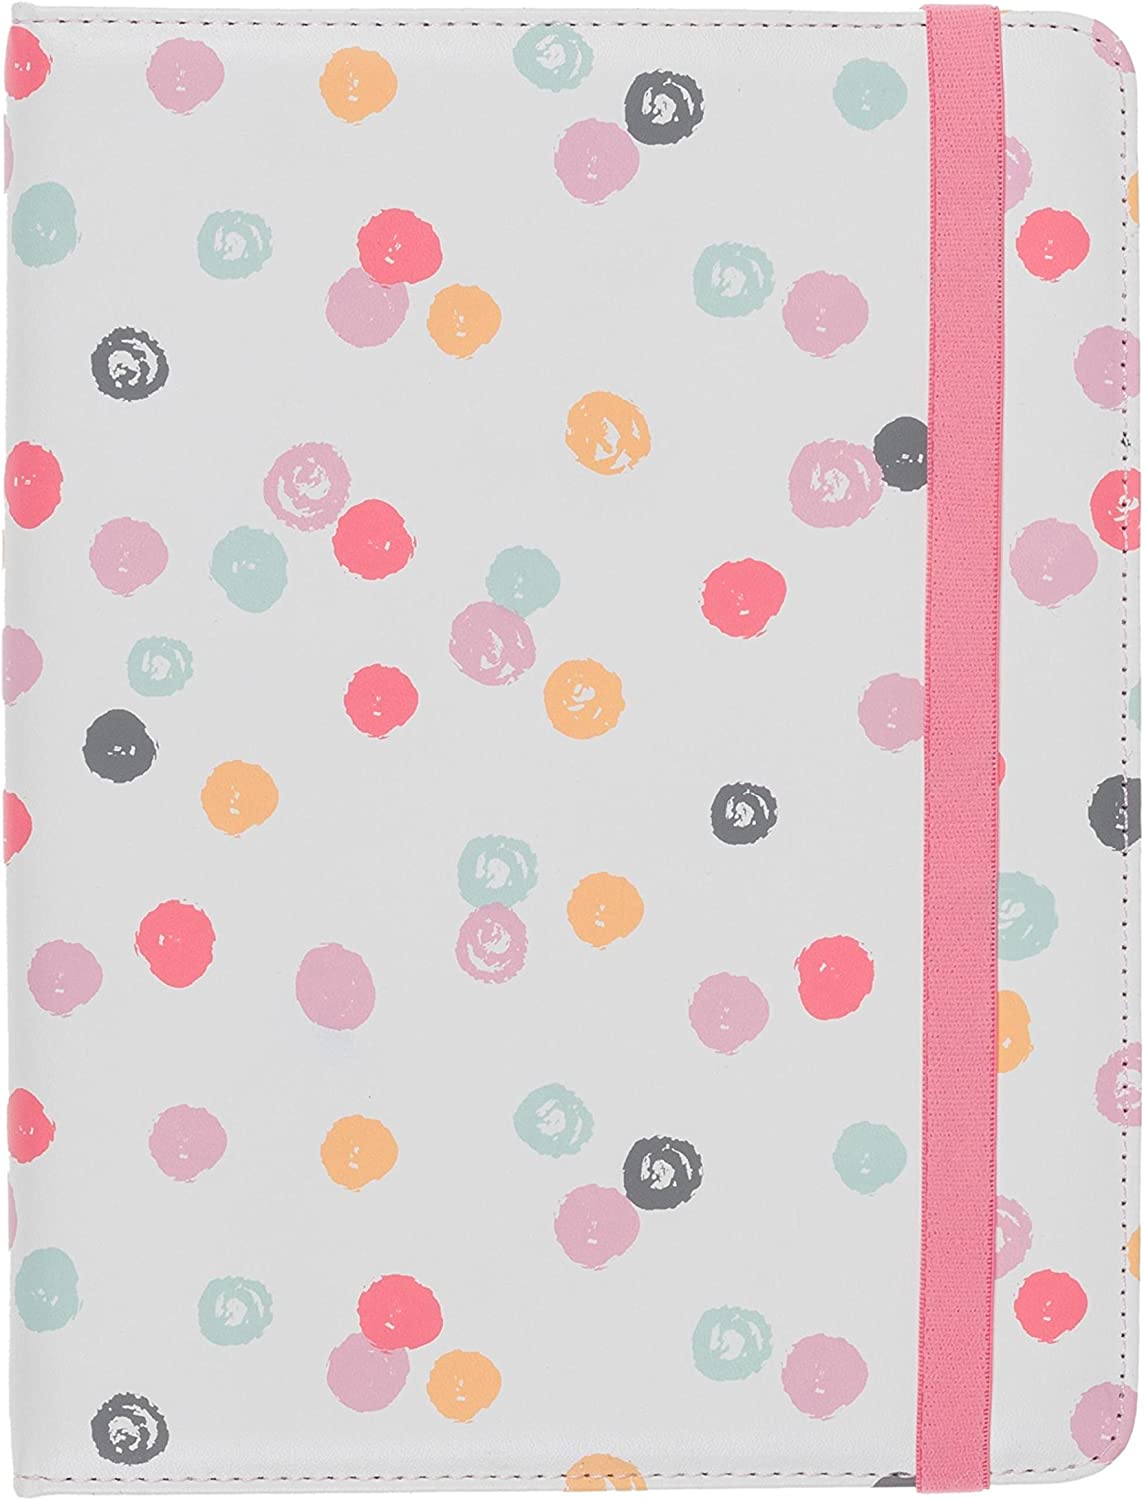 Trendz Folio Case W/ Built-in Stand for Tablets Confetti Polka TZ910PDC RRP £7.99 CLEARANCEXL £4.99